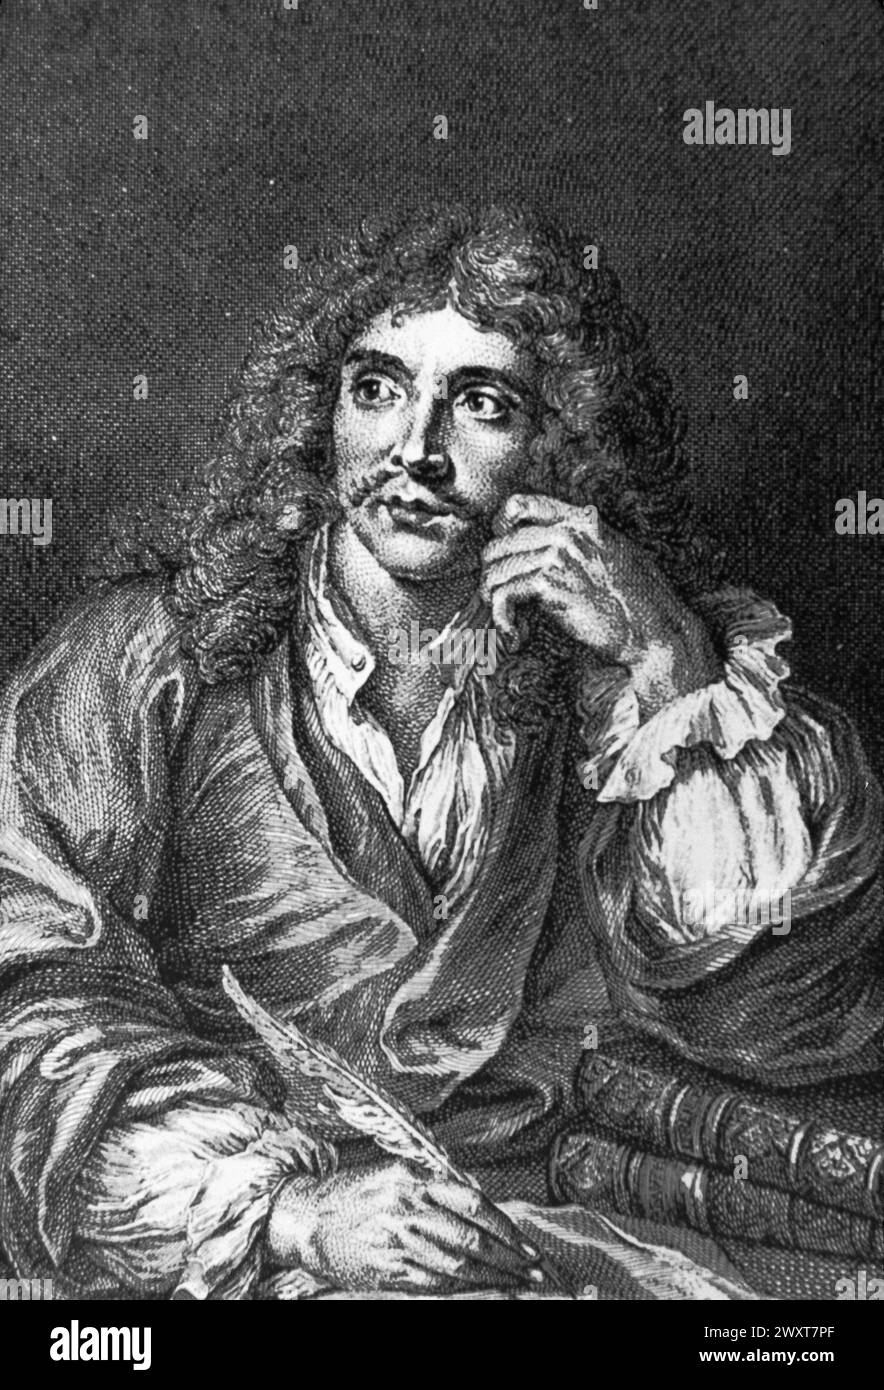 Portrait of French playwriter Moliere, engraving by Lepiciè after a painting by Charles Coypel, 17th century Stock Photo